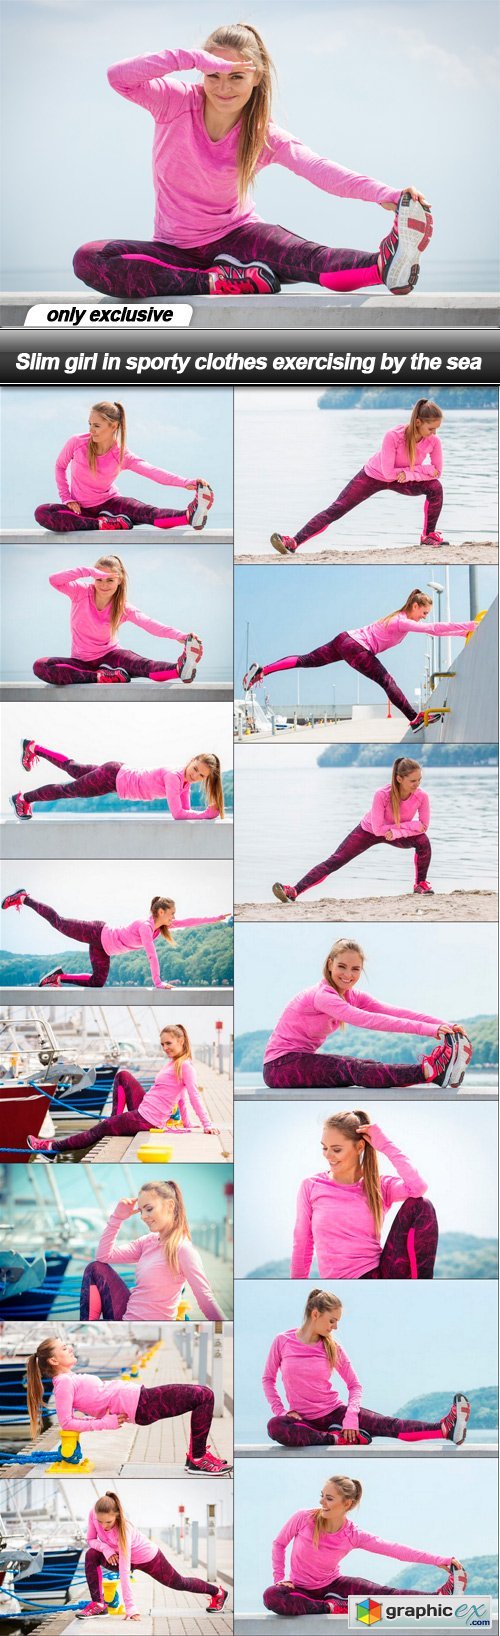 Slim girl in sporty clothes exercising by the sea - 15 UHQ JPEG